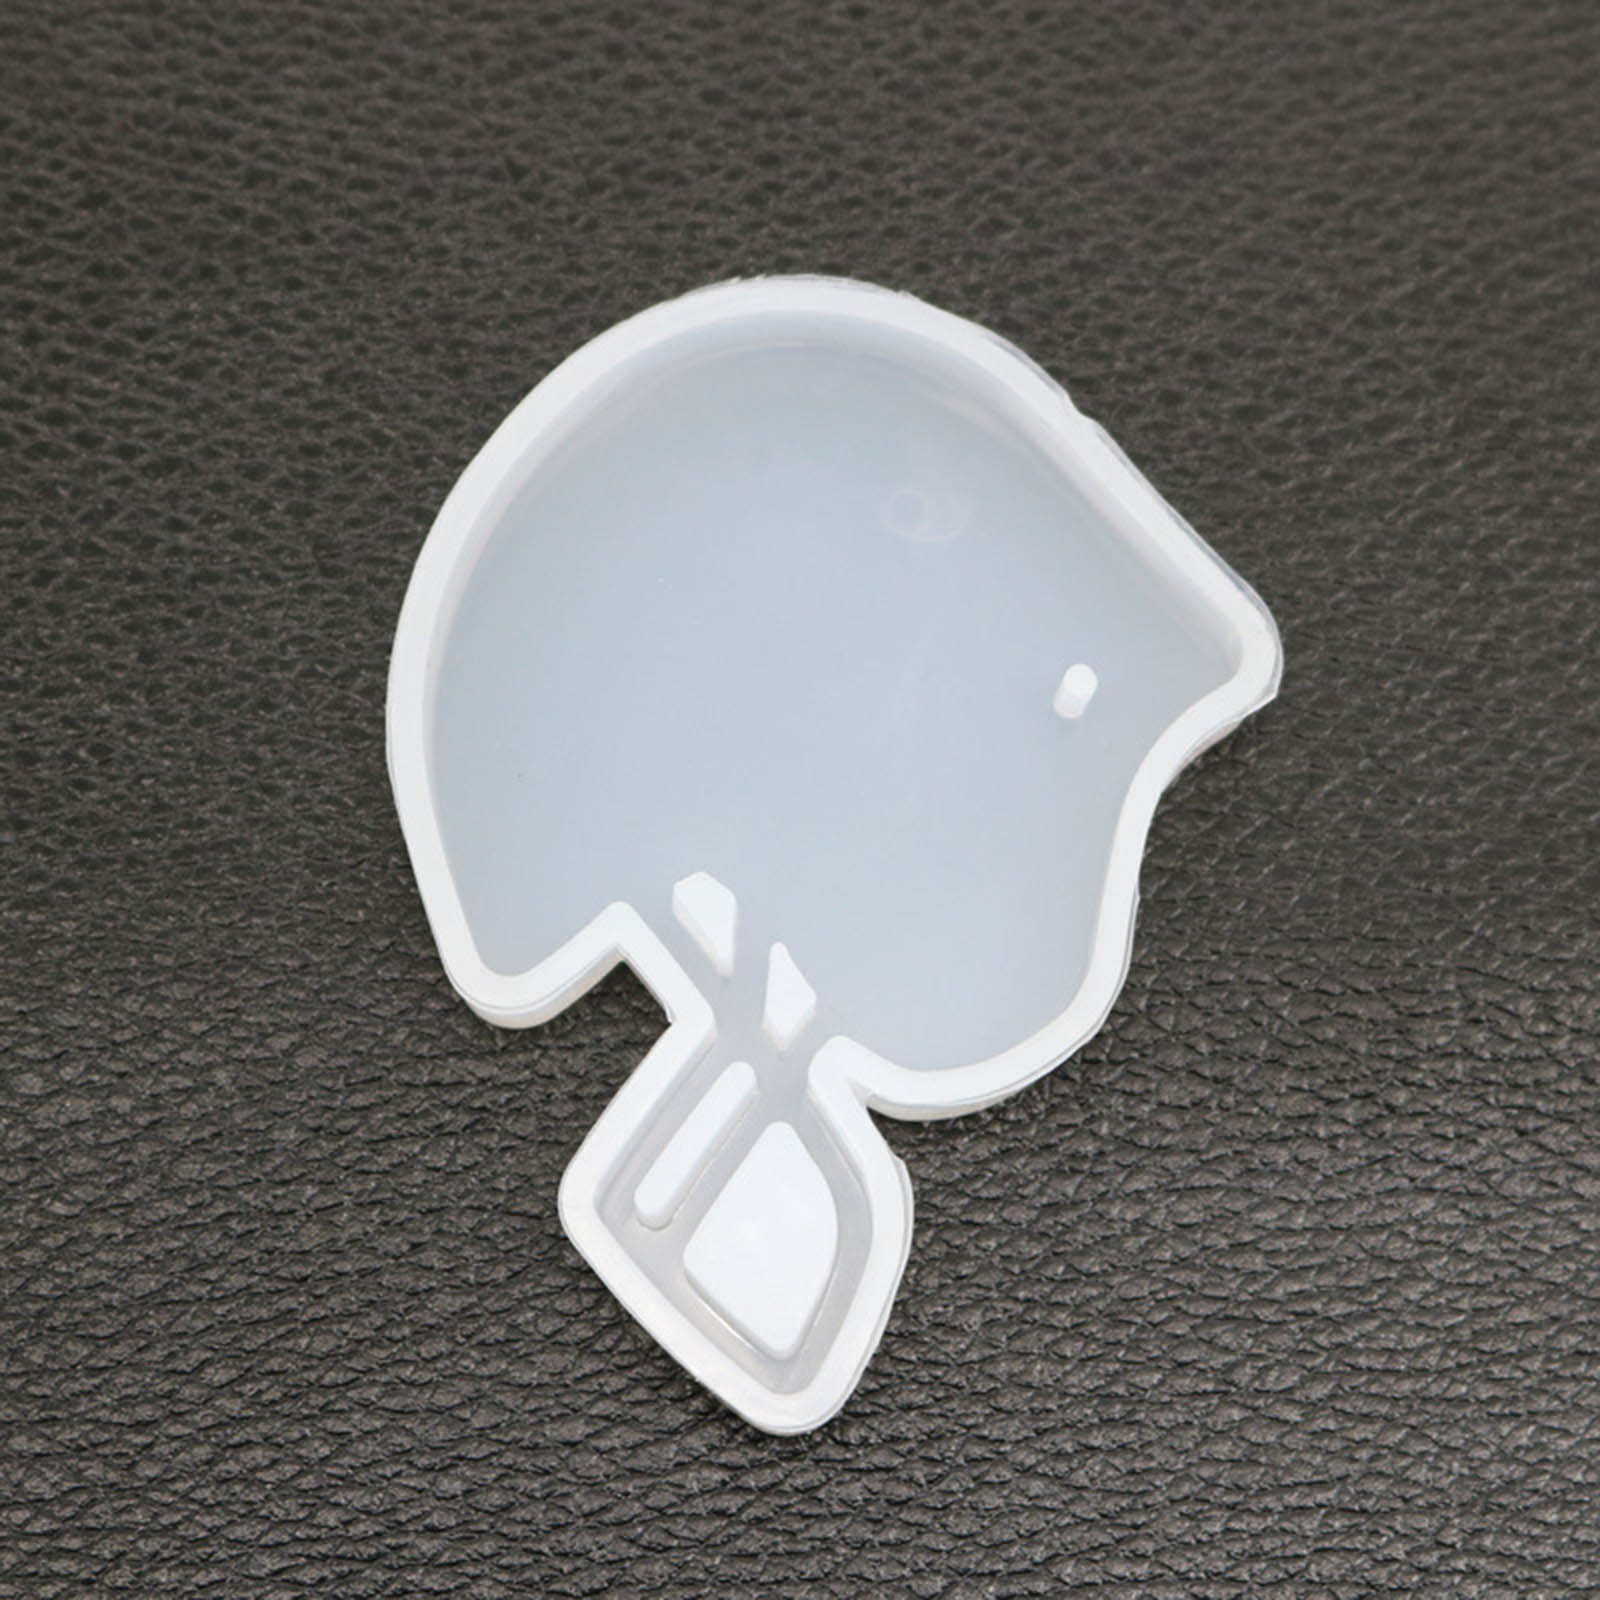 Picture of Silicone Resin Mold For Jewelry Making Pendant Girl White 7.1cm x 5.3cm, 1 Piece